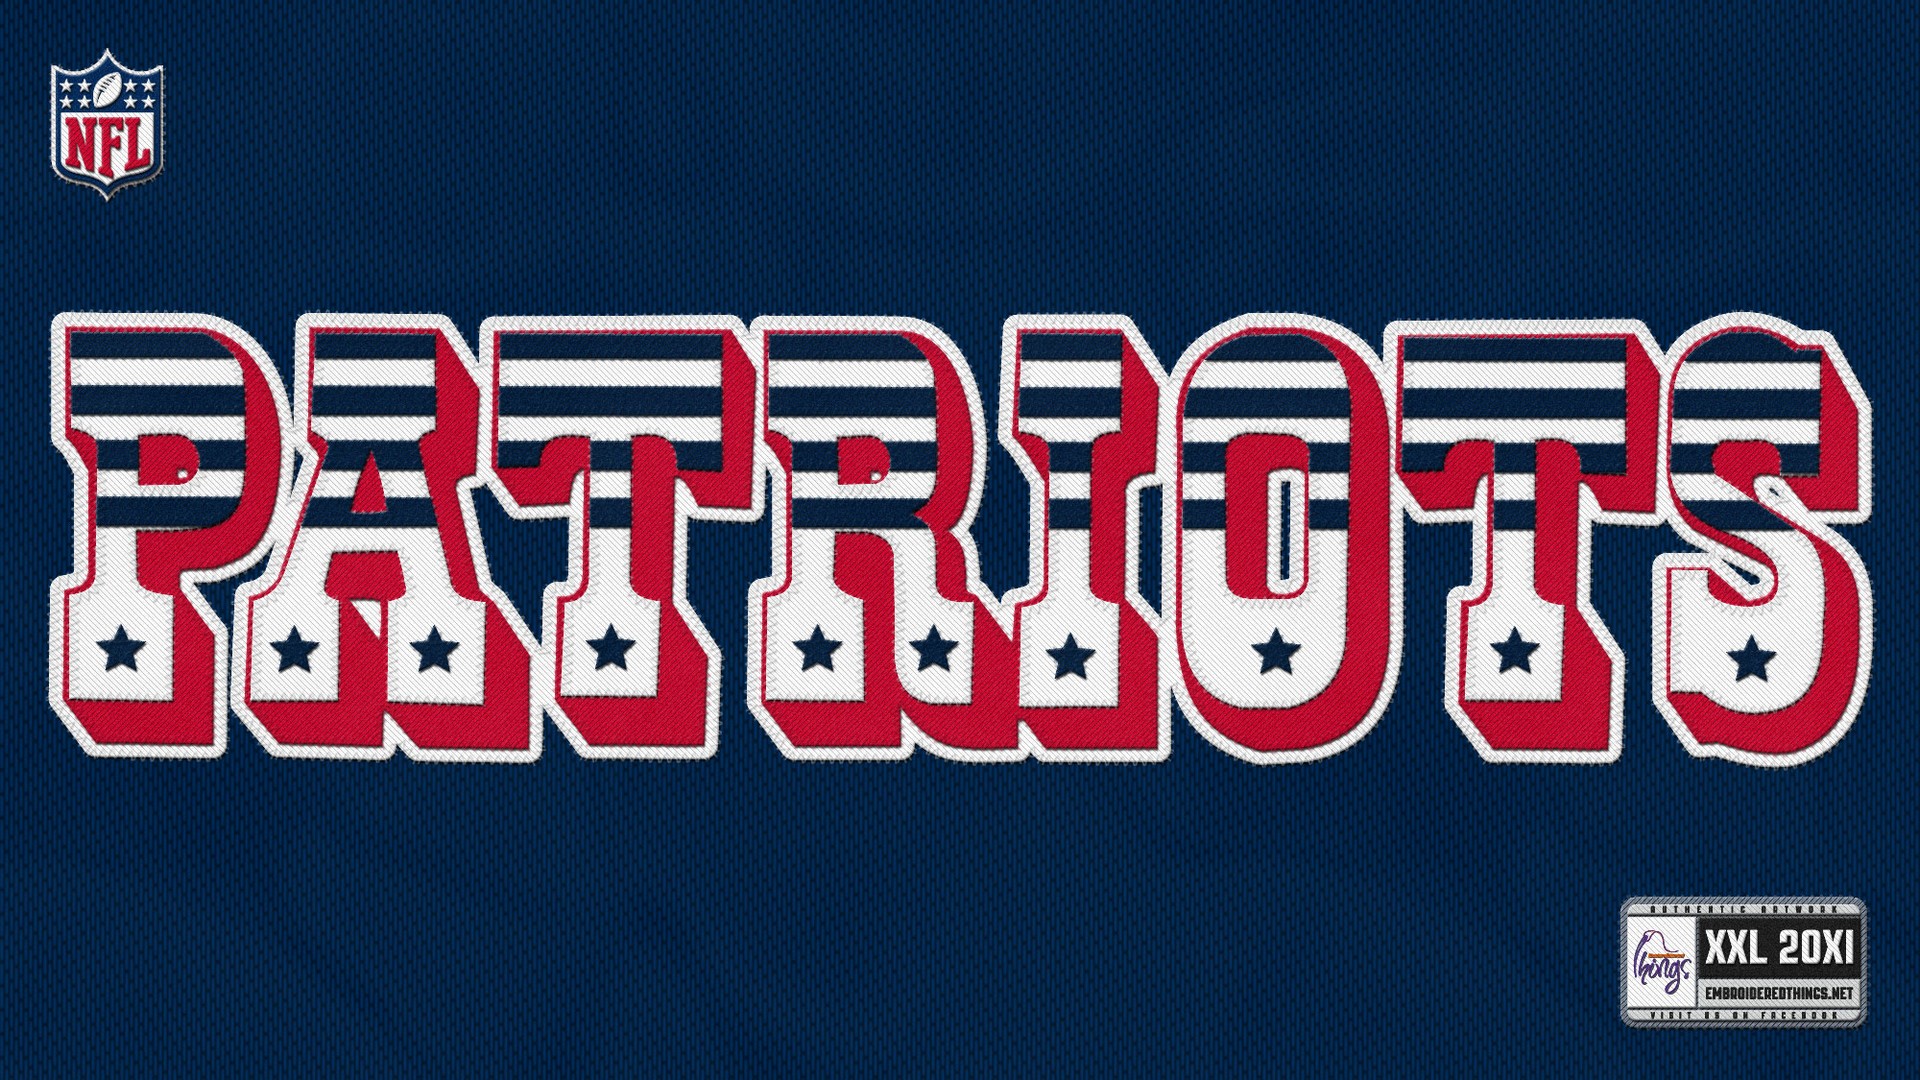 Wallpapers Patriots With Resolution 1920X1080 pixel. You can make this wallpaper for your Mac or Windows Desktop Background, iPhone, Android or Tablet and another Smartphone device for free